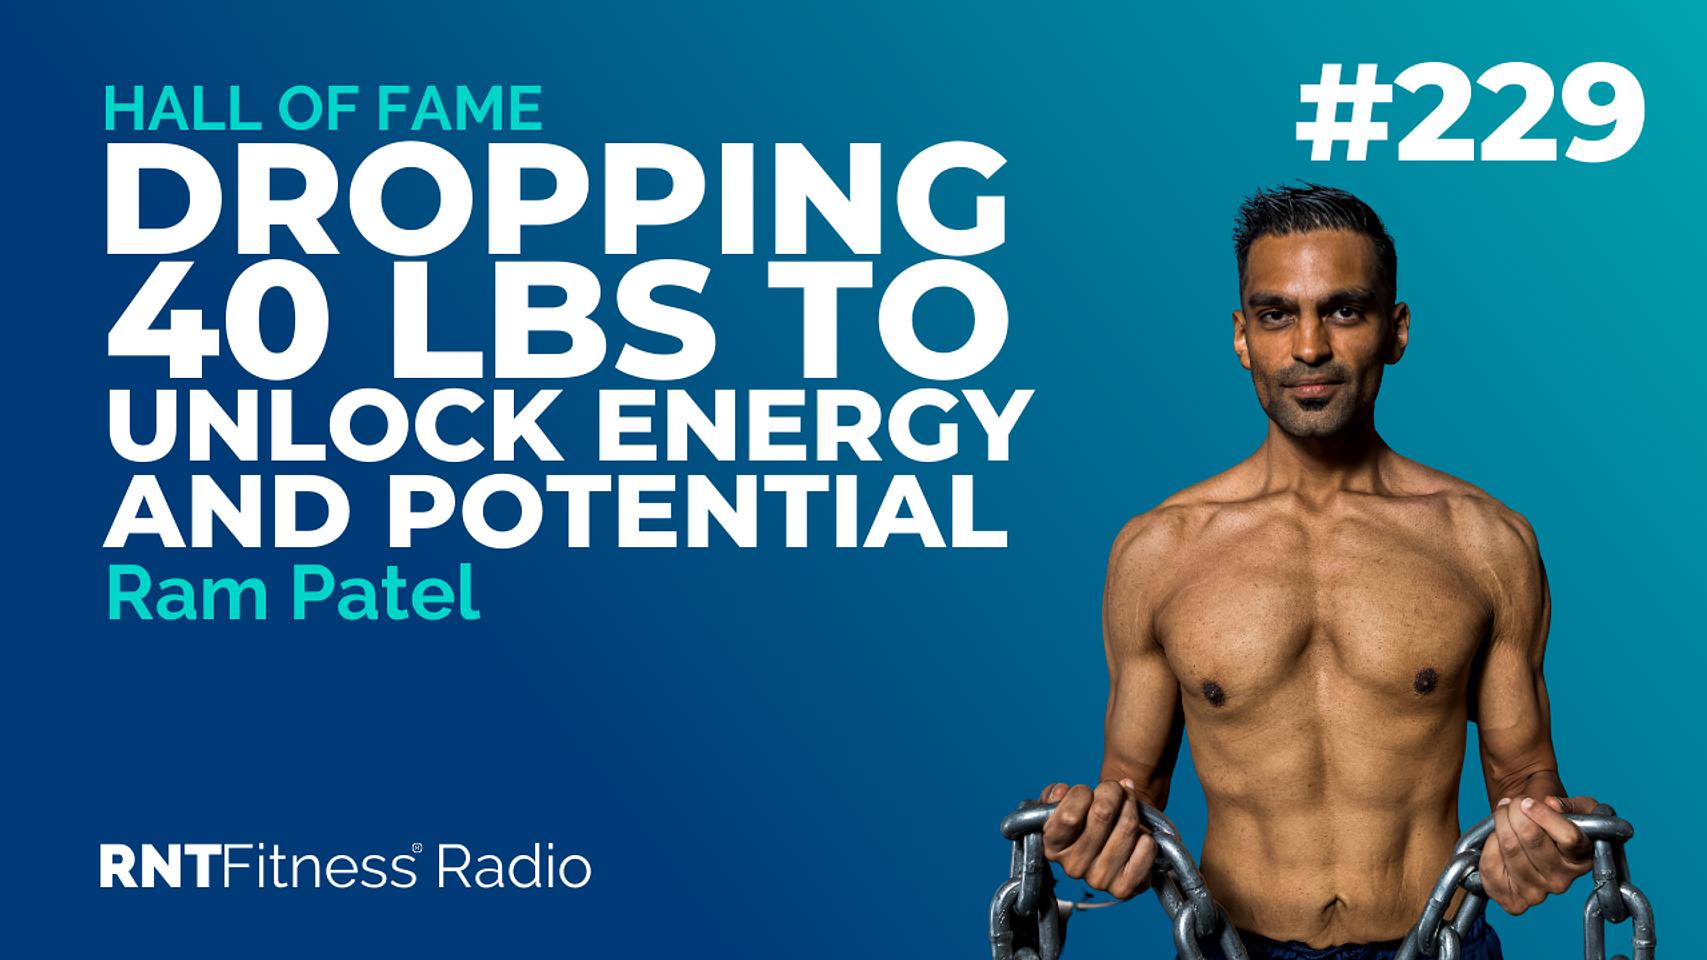 Ep. 229 - Hall of Fame | Ram Patel - Dropping 40kg To Unlock Energy & Potential